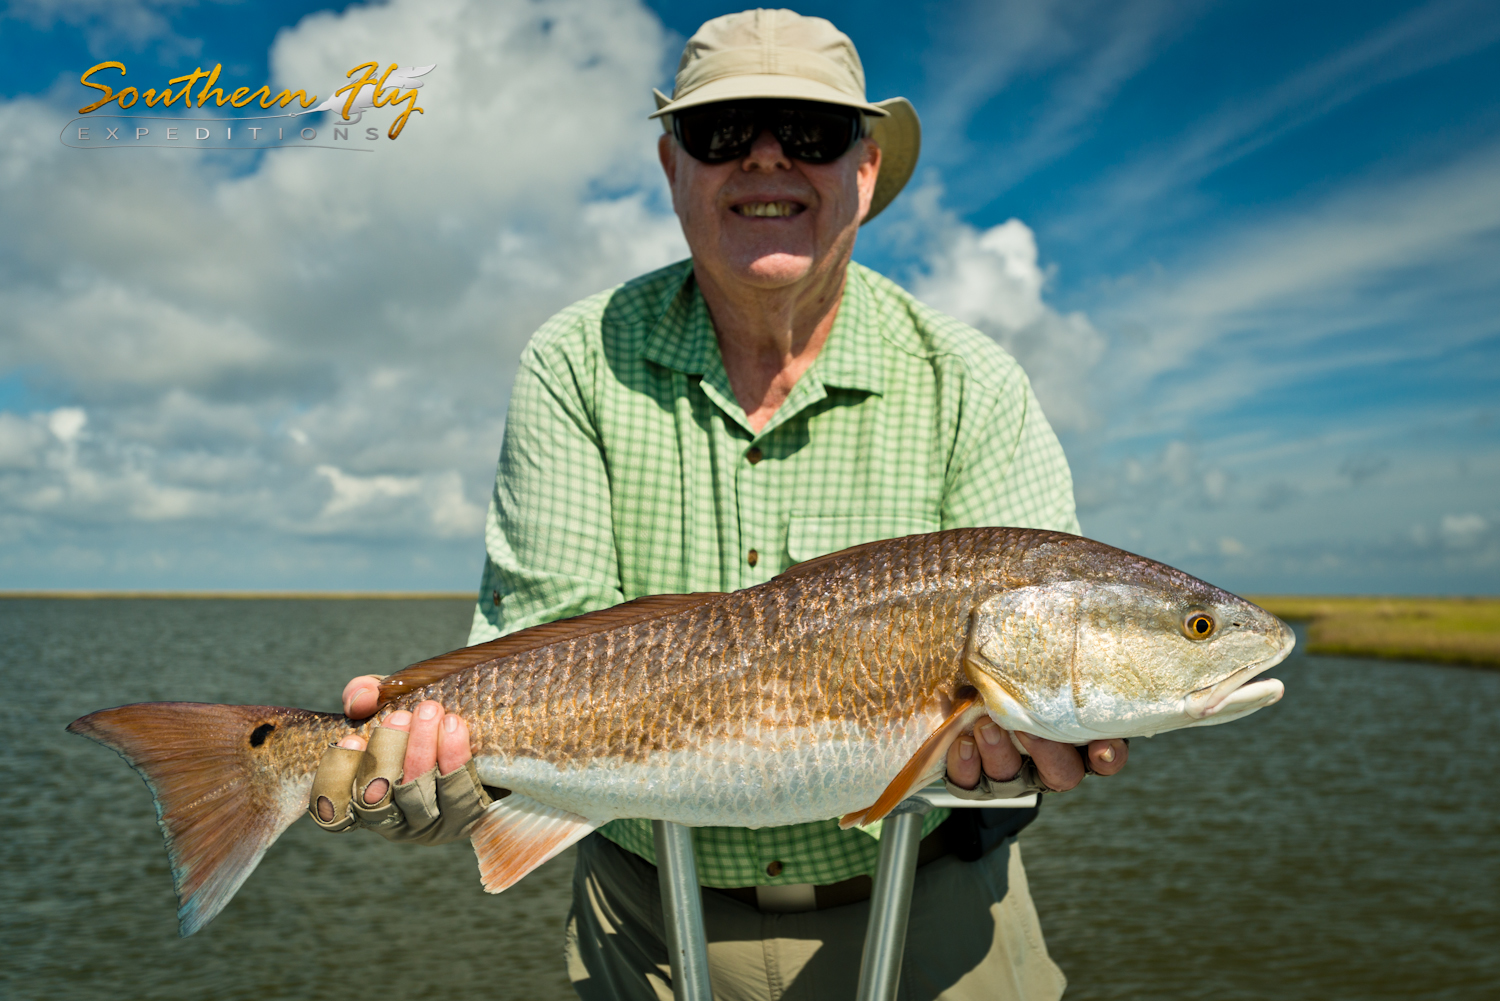 Fly Fishing Photos April 2015 with Southern Fly Expeditions of New Orleans